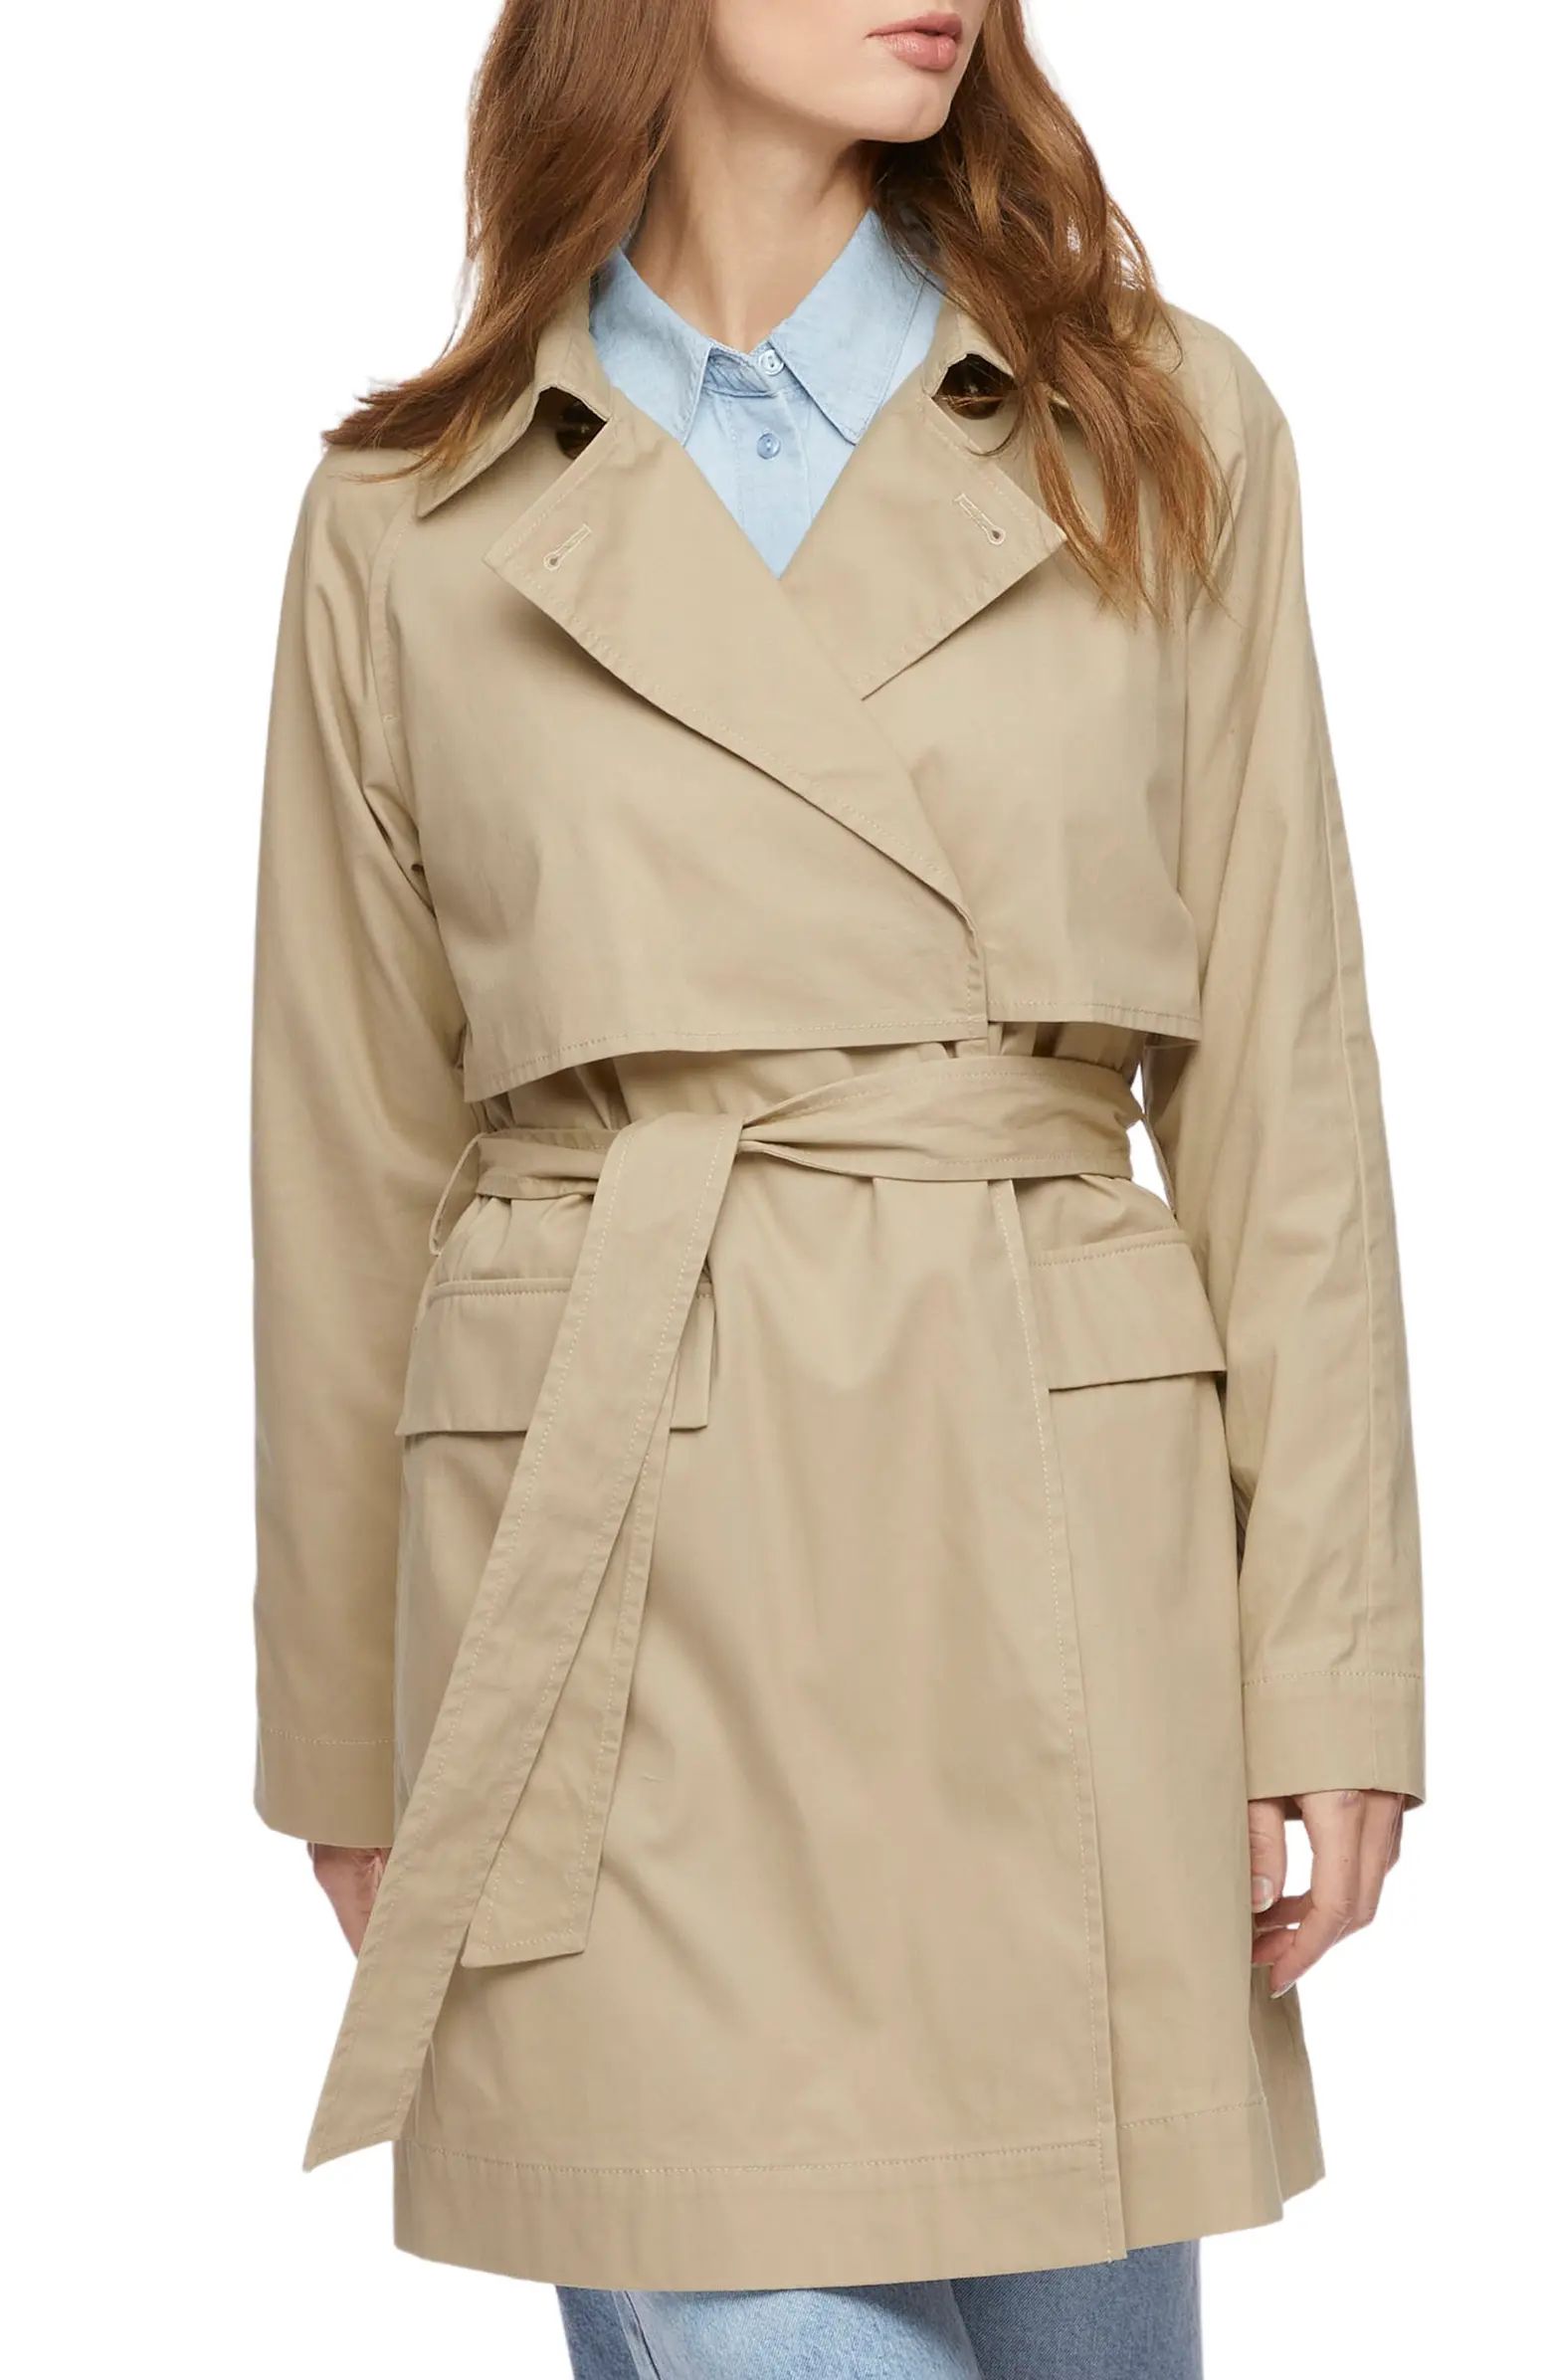 Cotton Twill Trench Coat | Nordstrom